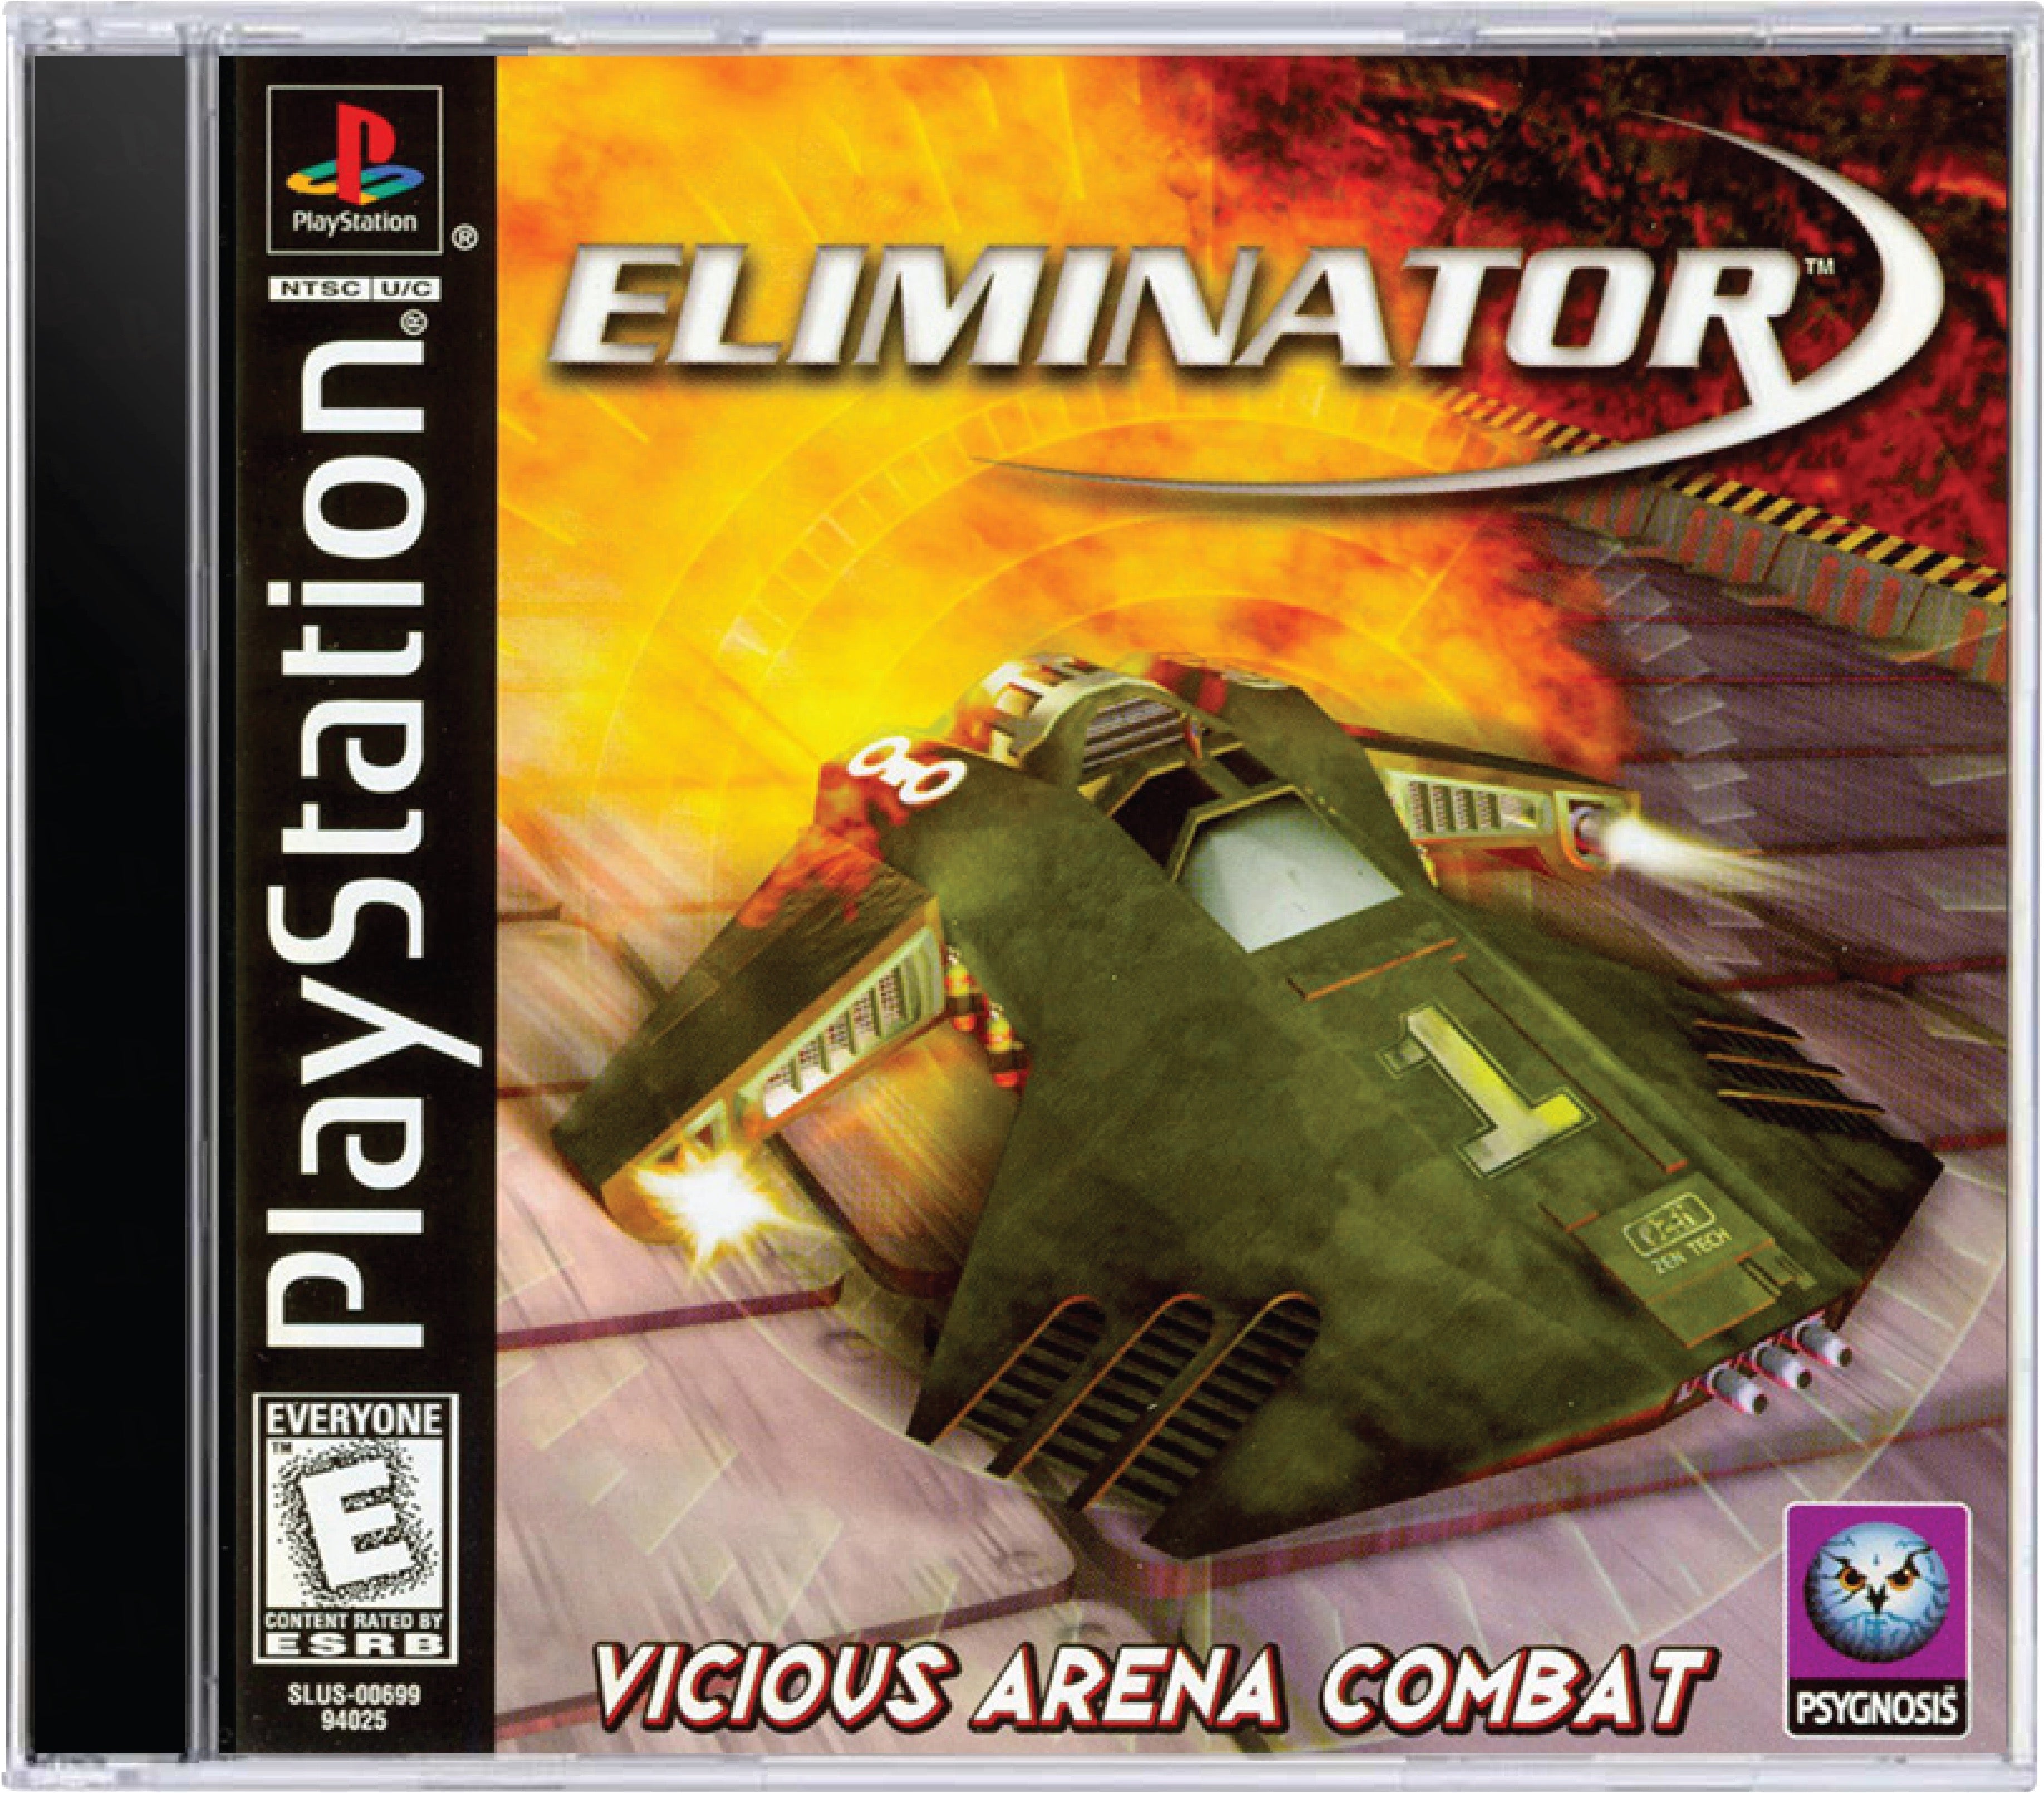 Eliminator Cover Art and Product Photo